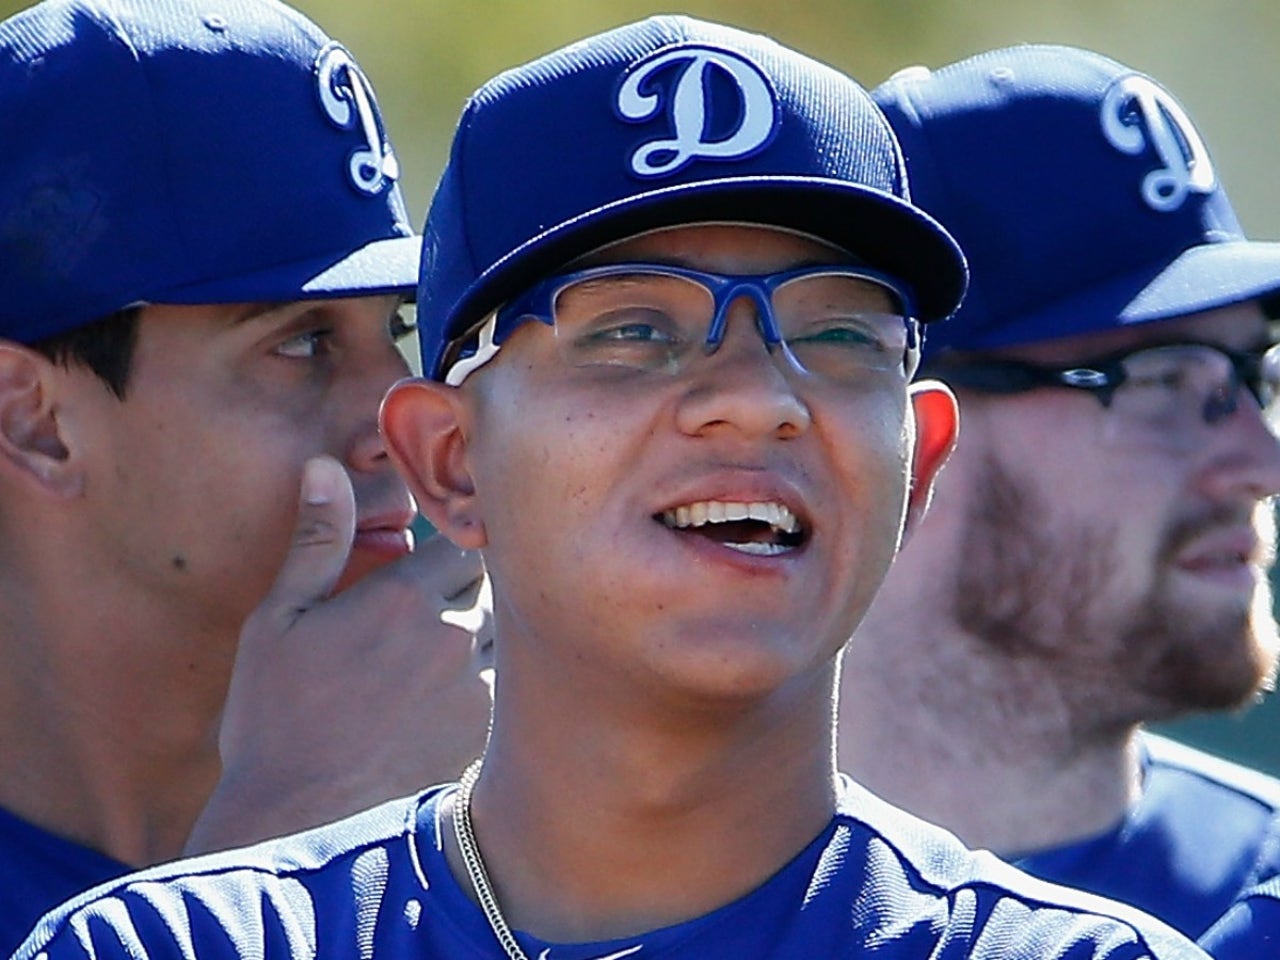 As 19-year-old Julio Urias makes his first start against the Mets